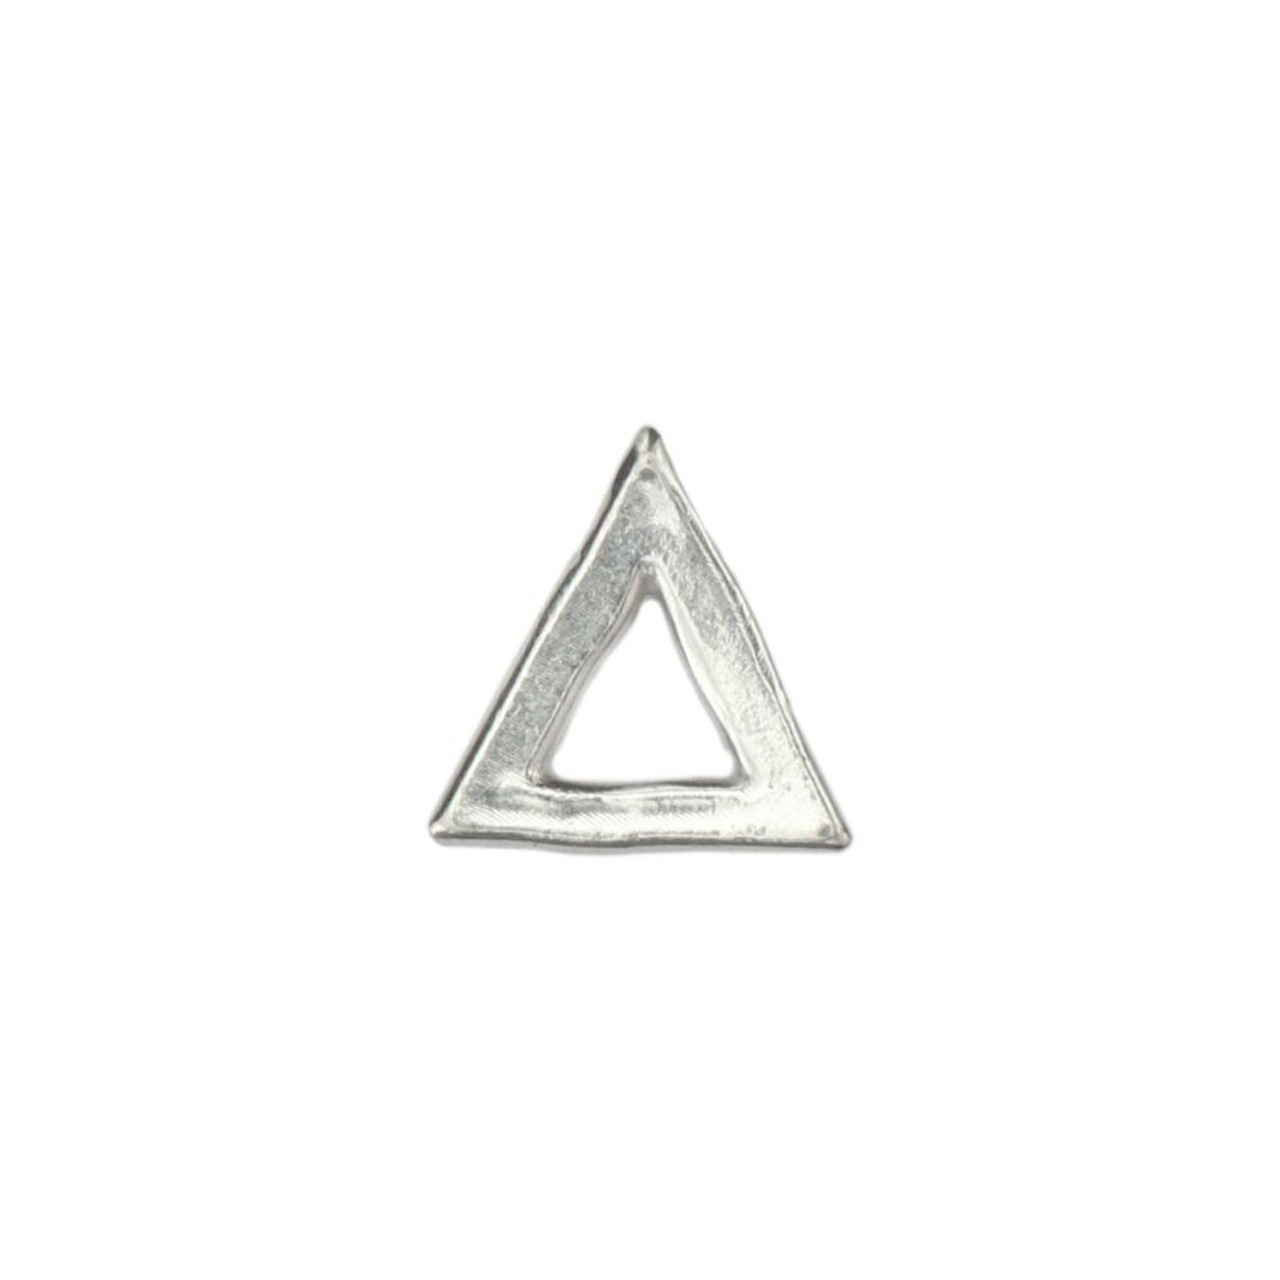 Small Triangle Organic Pewter Washer (1 Piece)